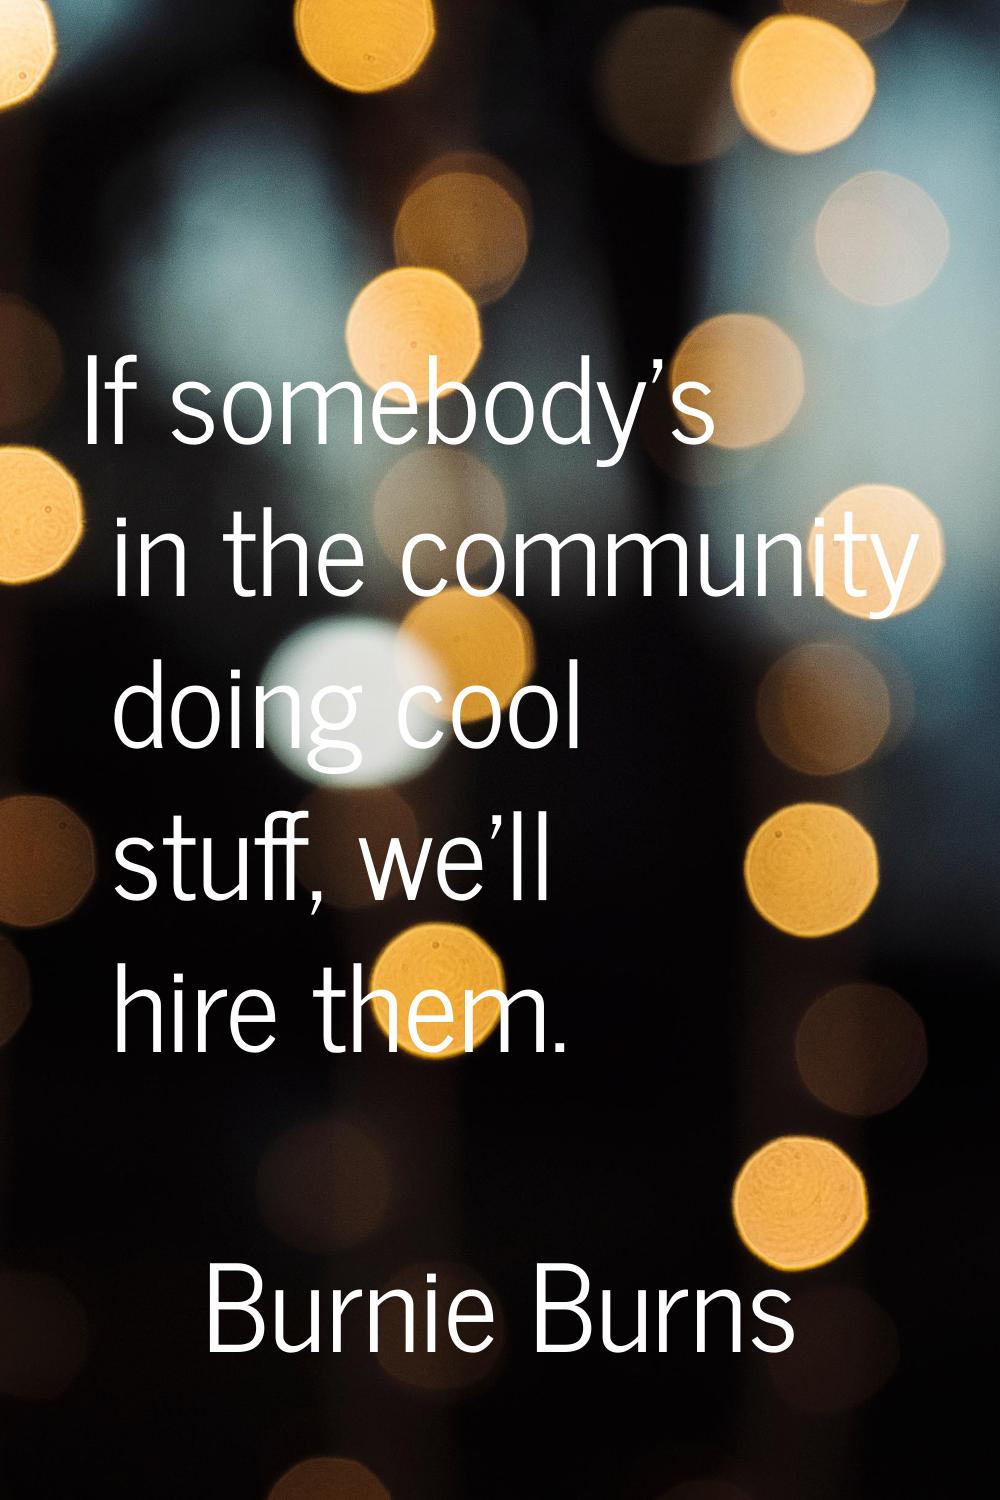 If somebody's in the community doing cool stuff, we'll hire them.